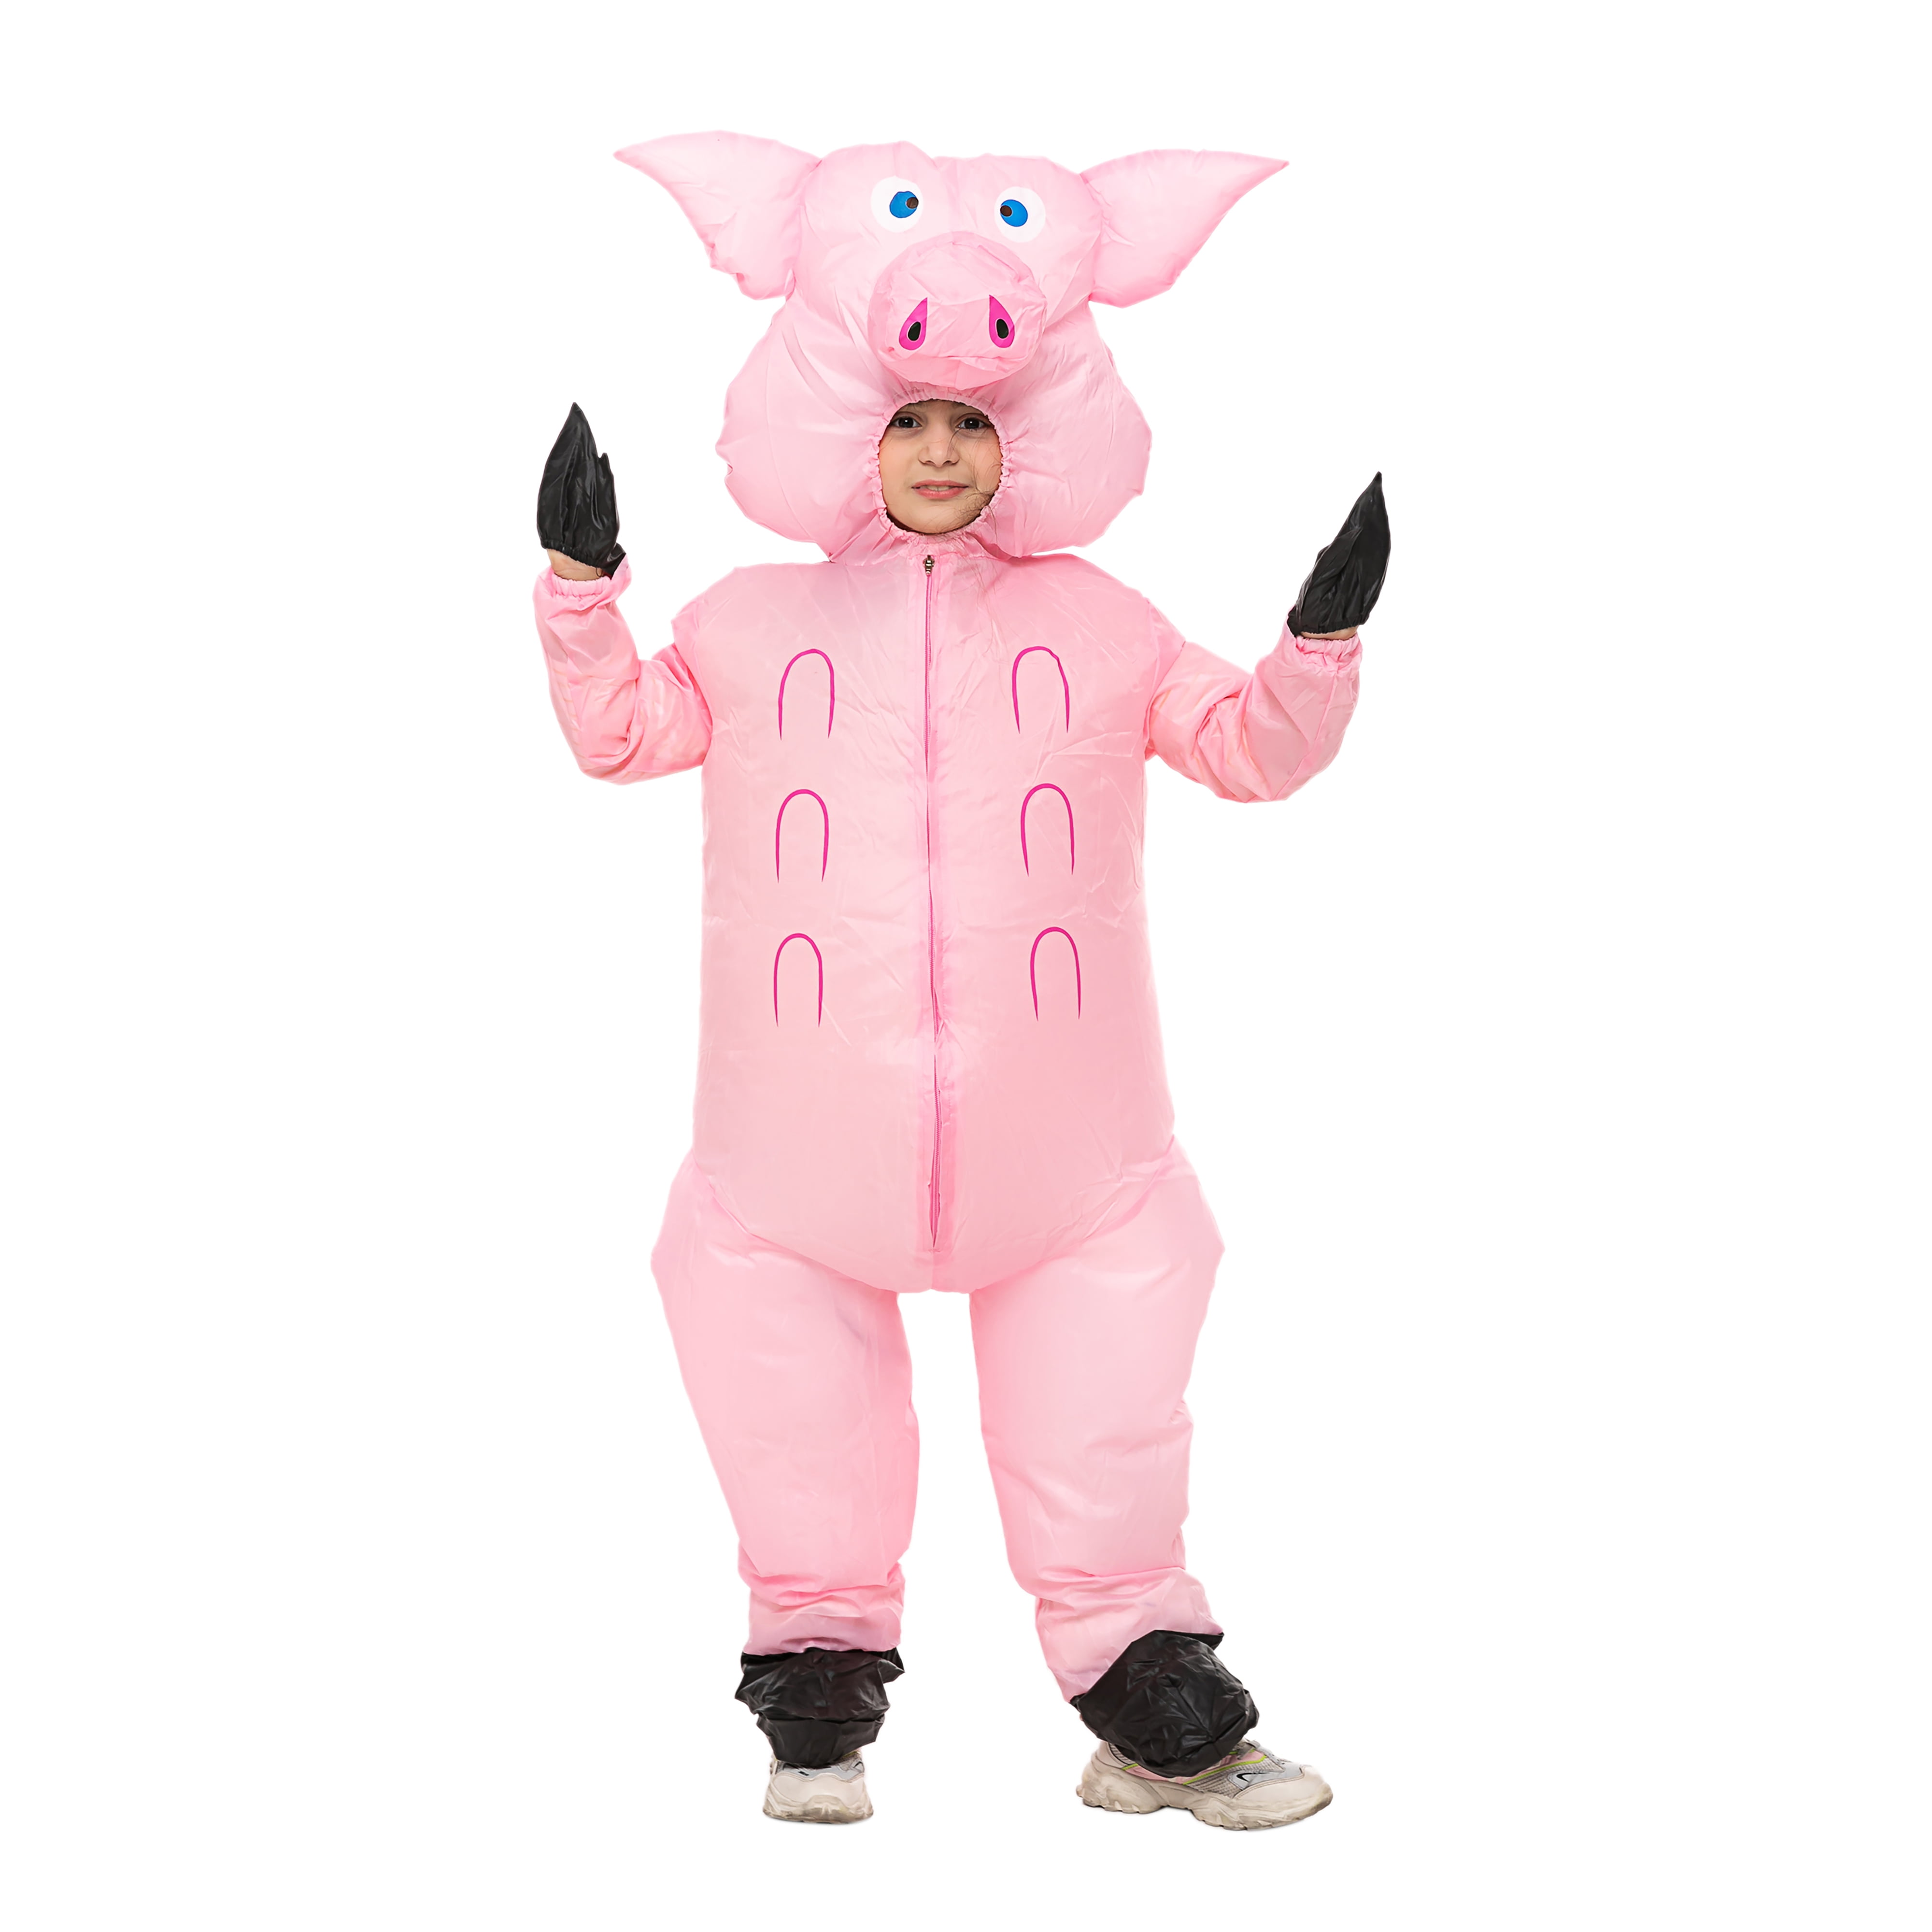 Inflatable Costume Full Body Suit, Full Body Halloween Costumes